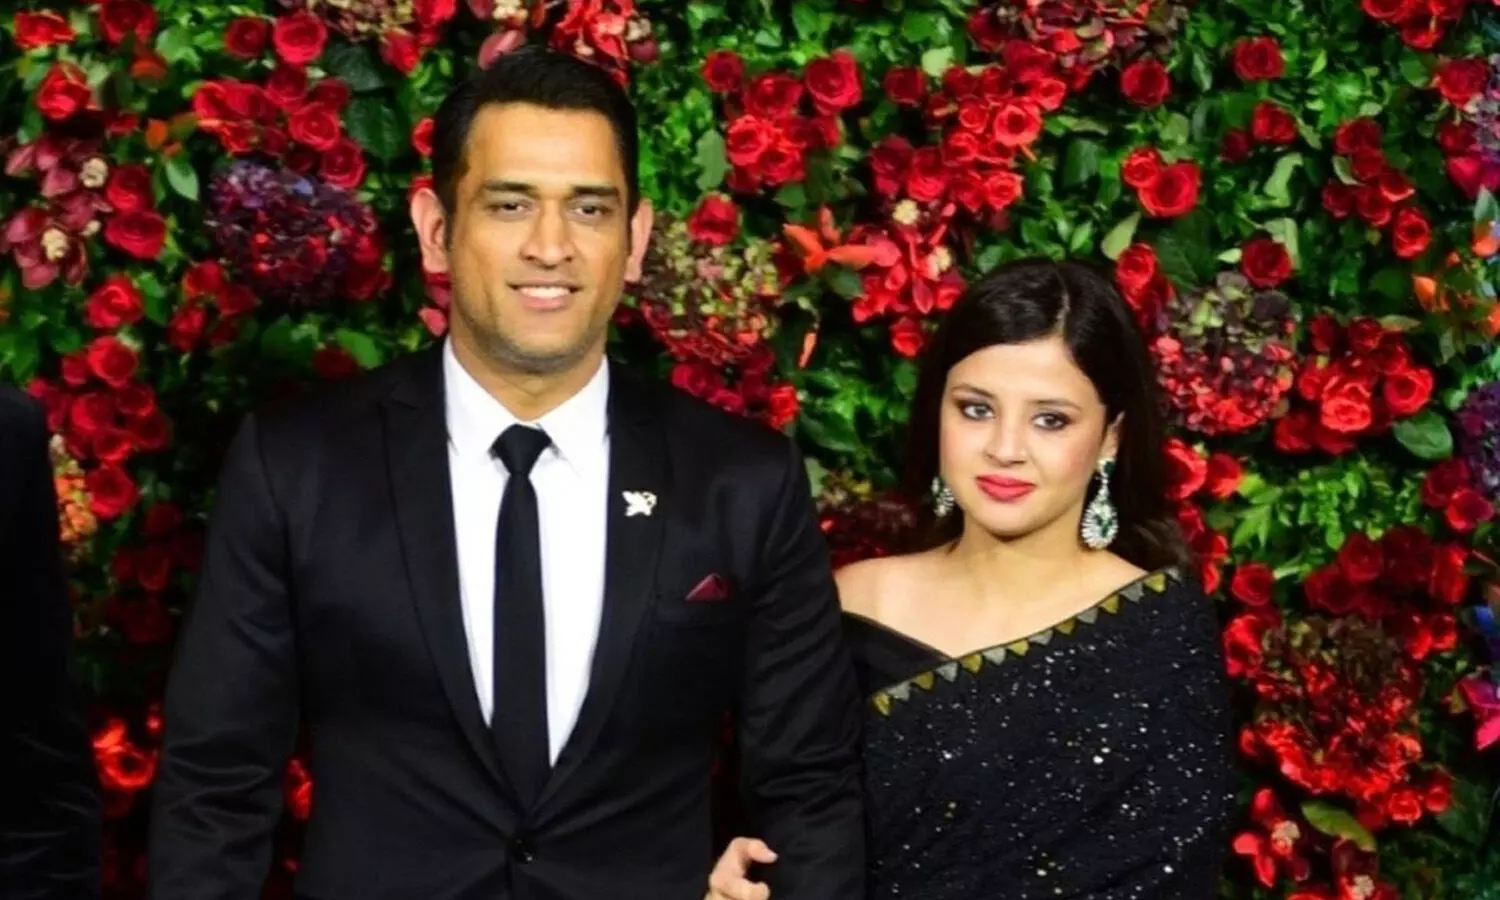 MS Dhoni & Sakshi Anniversary <3: CSK writes Congratulations to our King and Queen